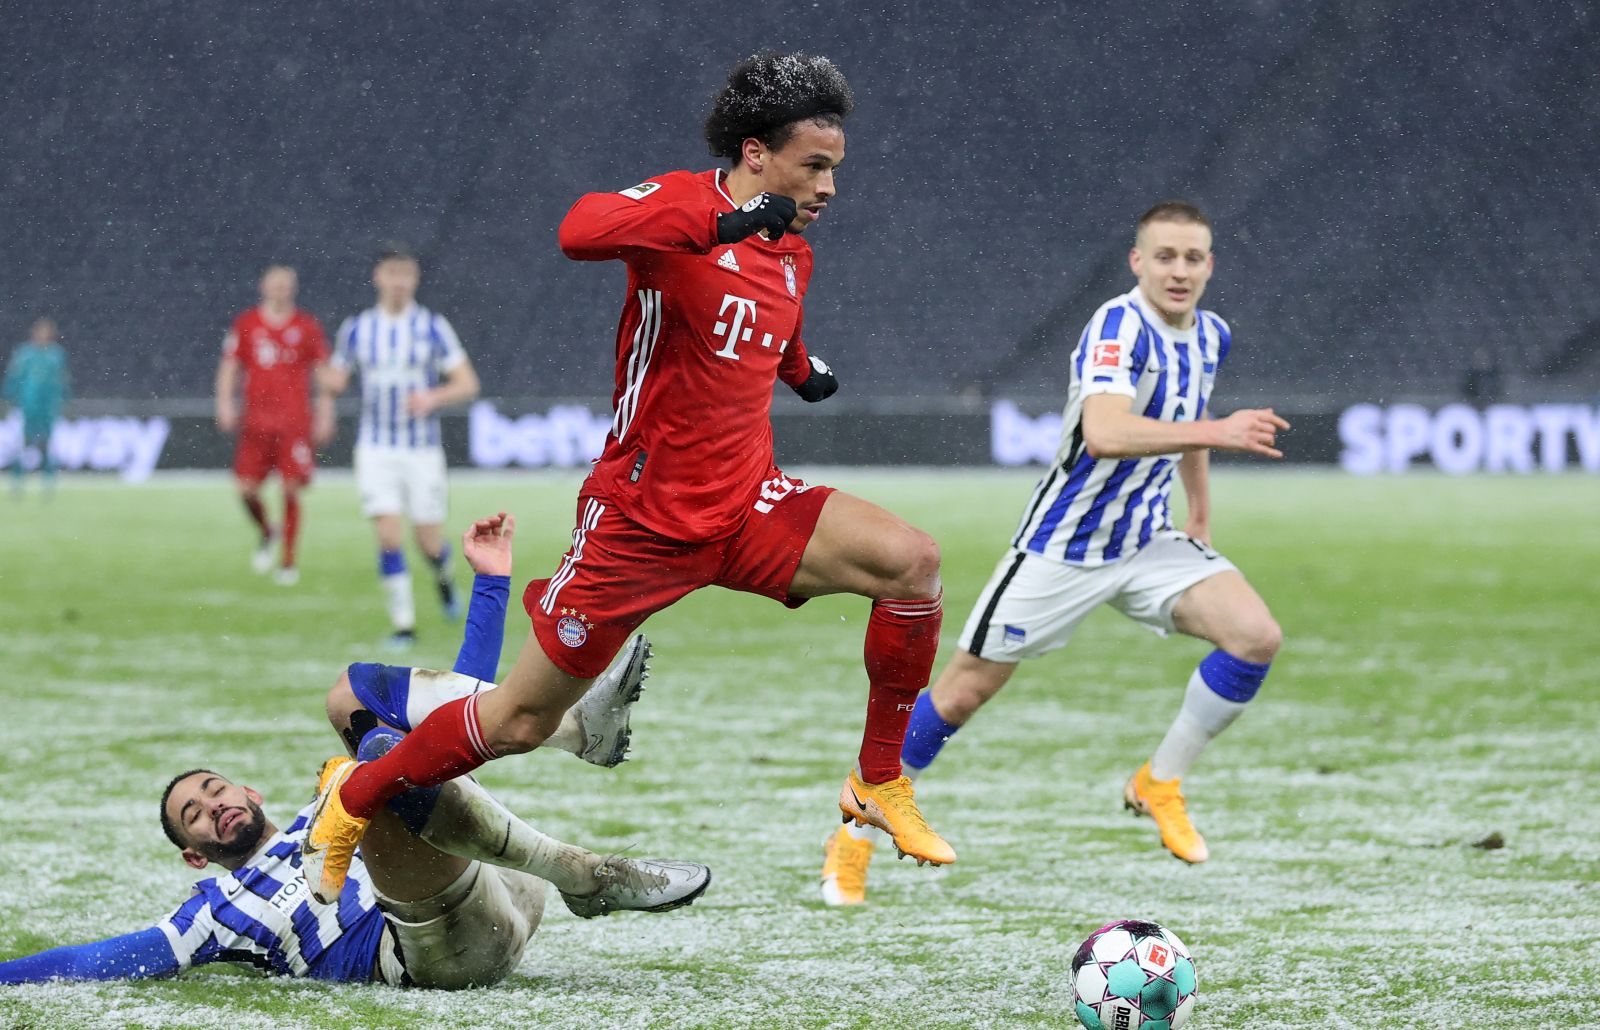 epa08990103 Matheus Cunha (L) of Berlin challenges Leroy Sane of Muenchen during the German Bundesliga soccer match between Hertha BSC and FC Bayern Munich at Olympiastadion in Berlin, Germany, 05 February 2021.  EPA/Boris Streubel / POOL DFL regulations prohibit any use of photographs as image sequences and/or quasi-video.